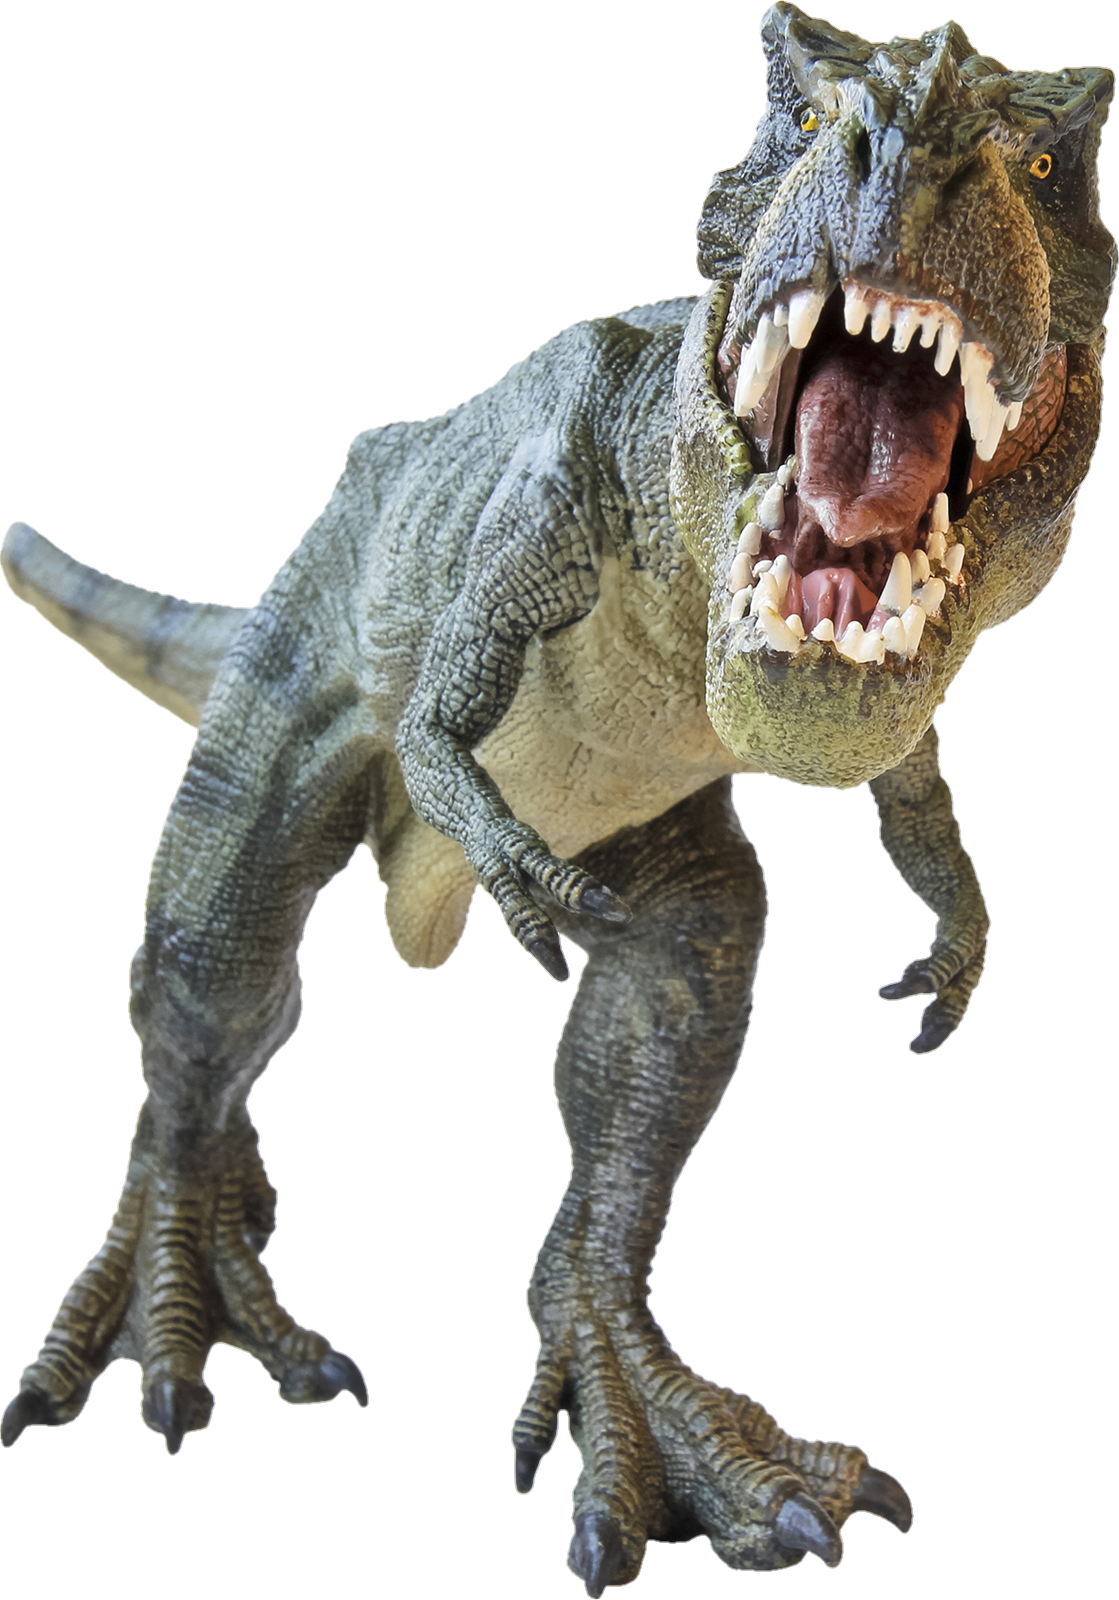 Dinosaur PNG Images Free Download - Pngfre